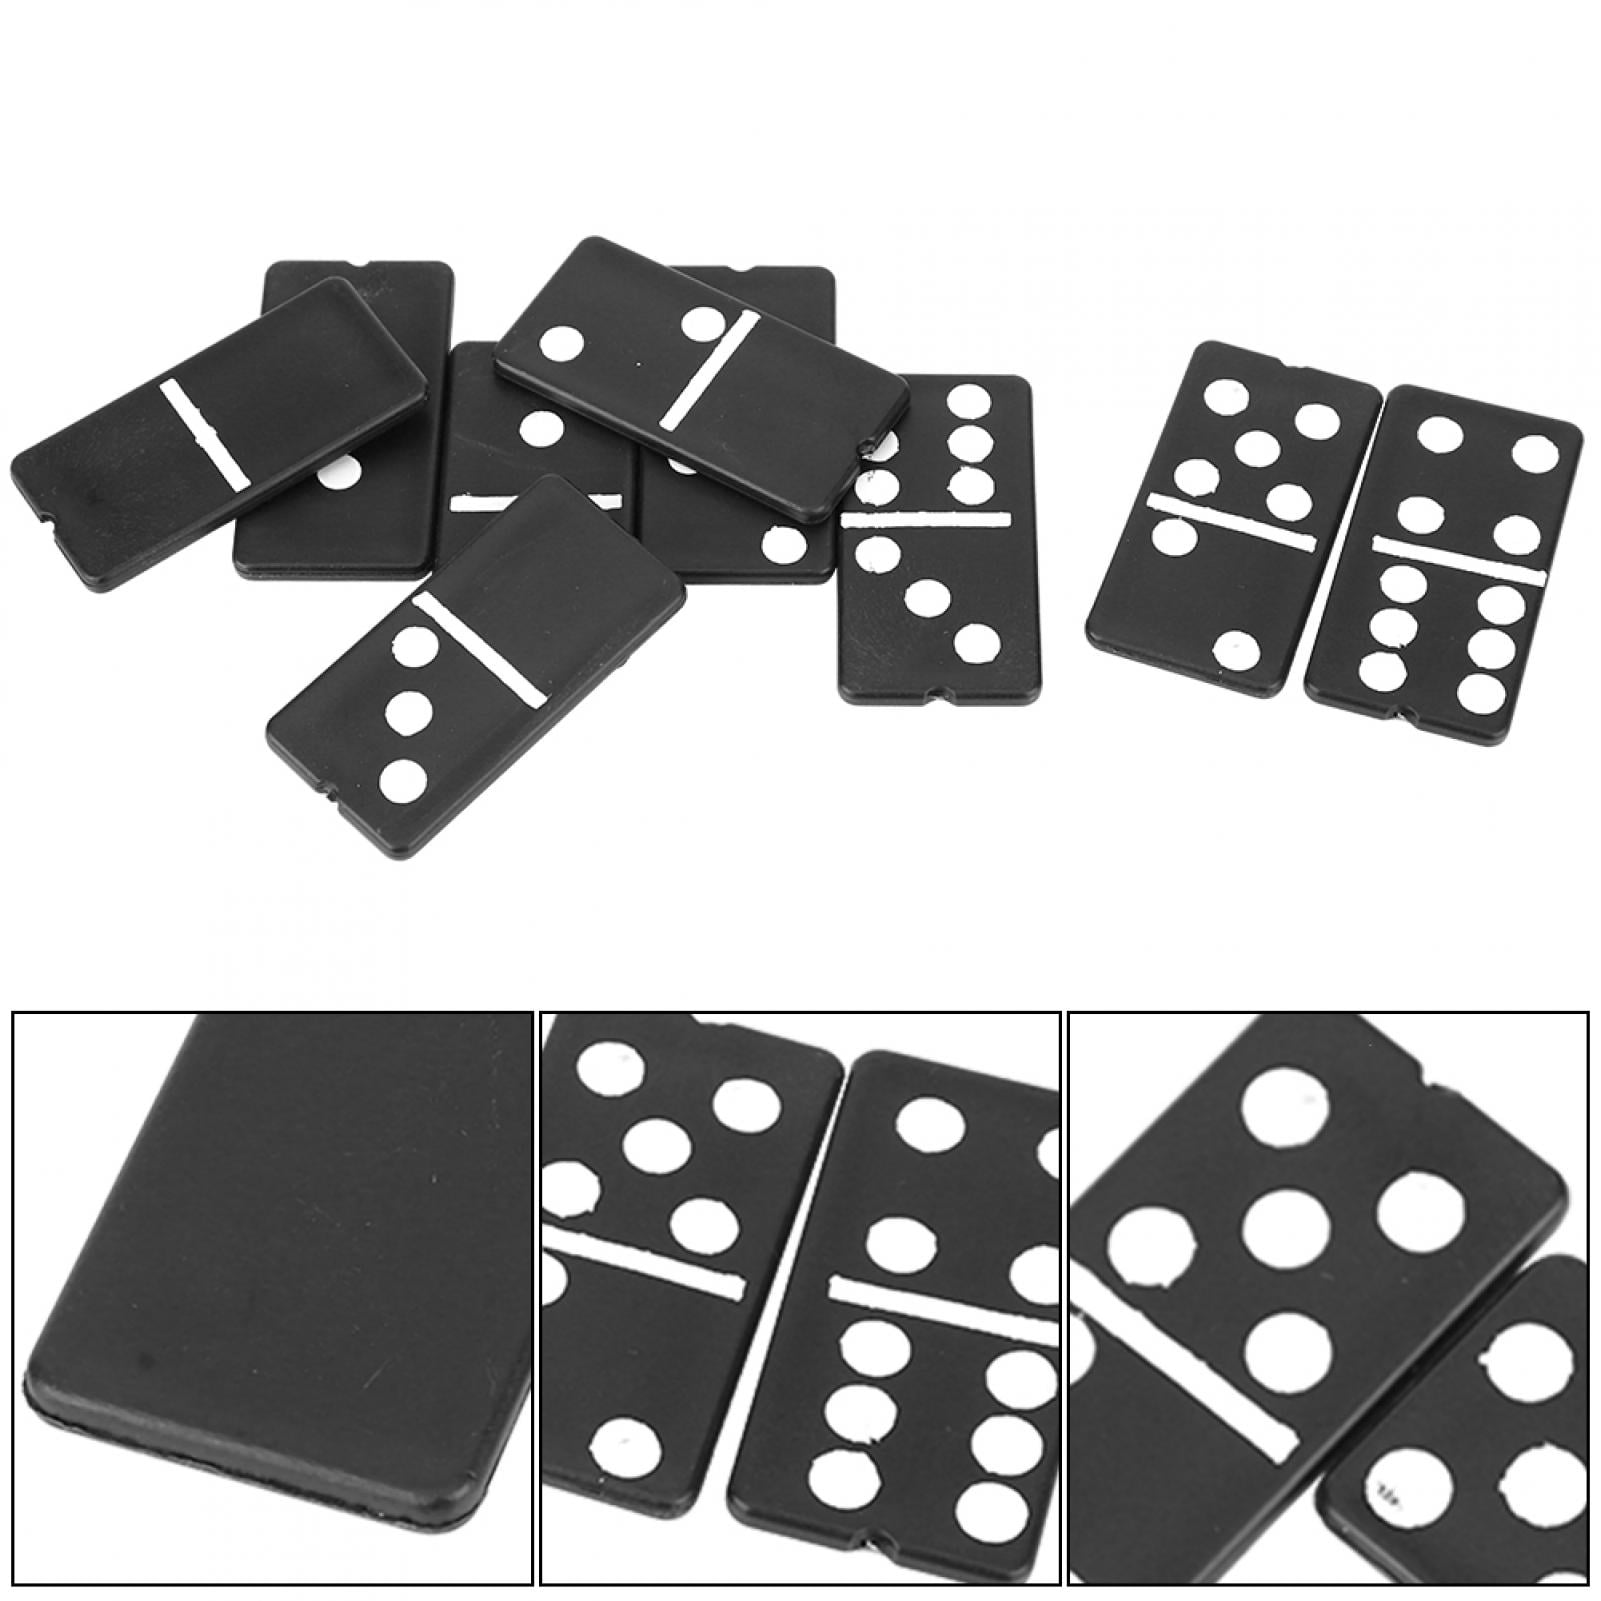 28Pcs/Set Domino Card Game Affordable Safe for Party Dominoes 28 Outdoors Use Adults Kids 